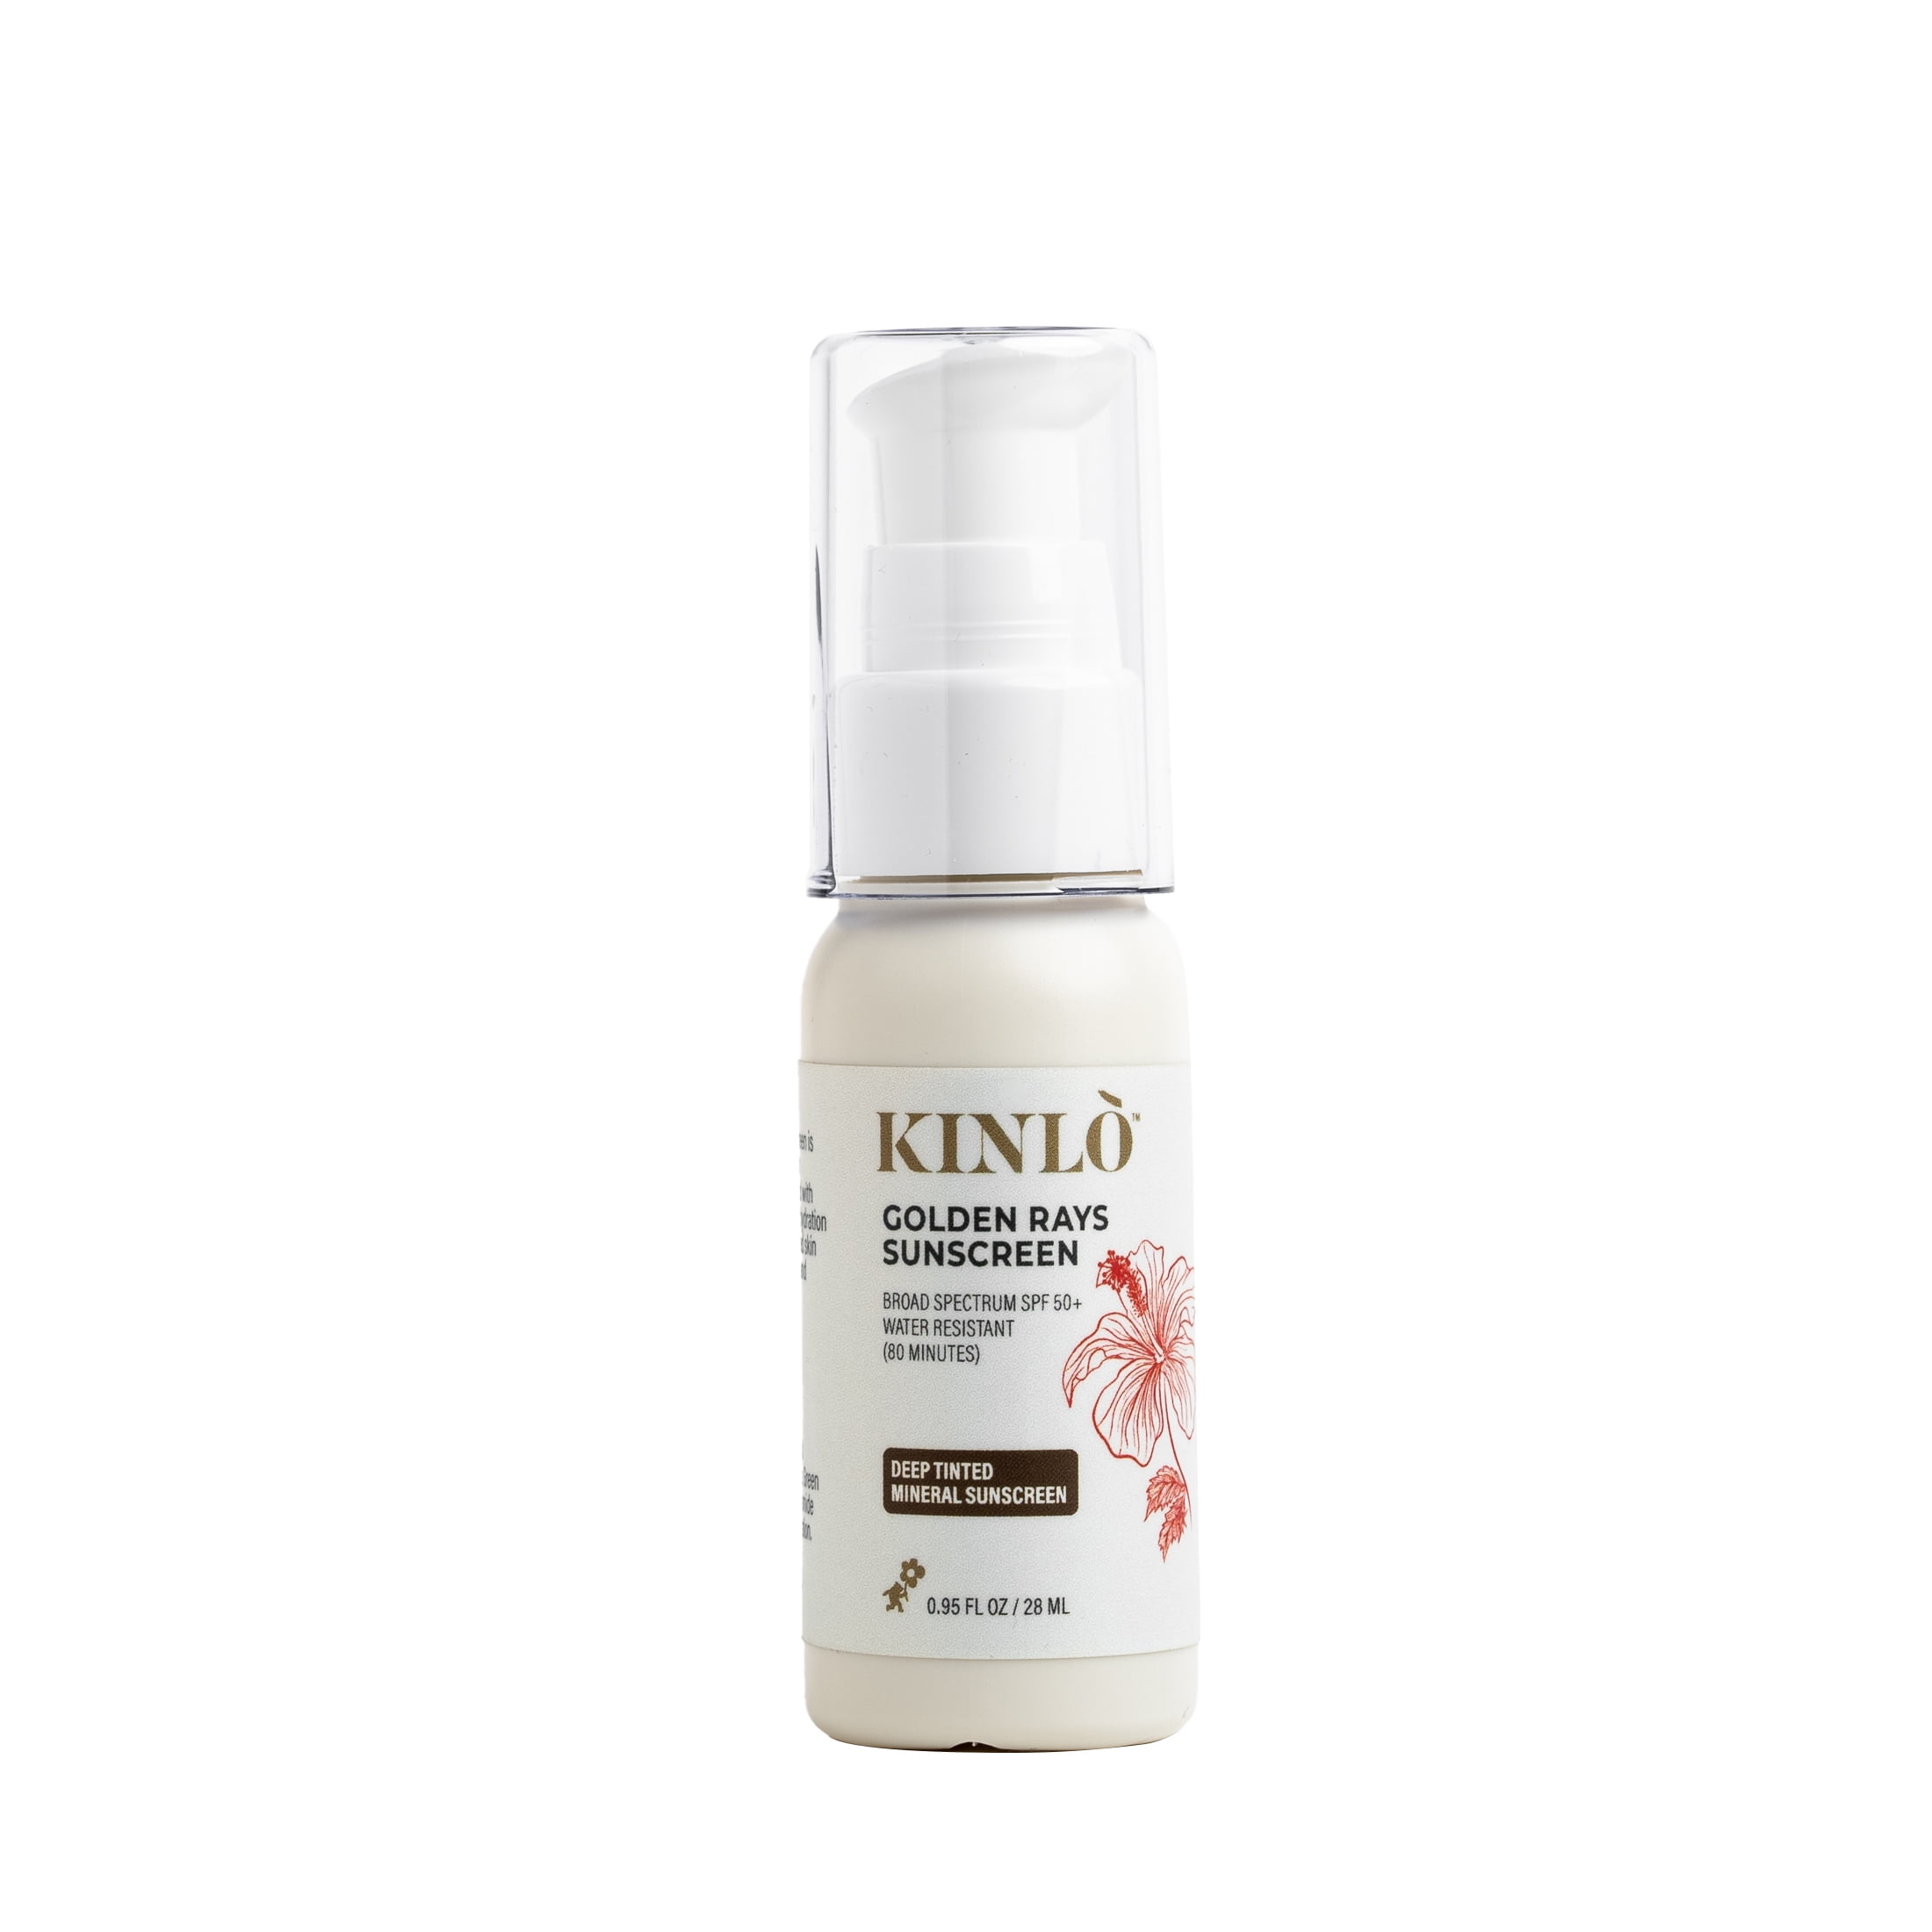 KINLO Golden Rays Tinted Sunscreen SPF 50, Active Mineral Sunscreen, Reef Safe, Water Resistant Up to 80 min, Shade Deep 0.95 fl oz